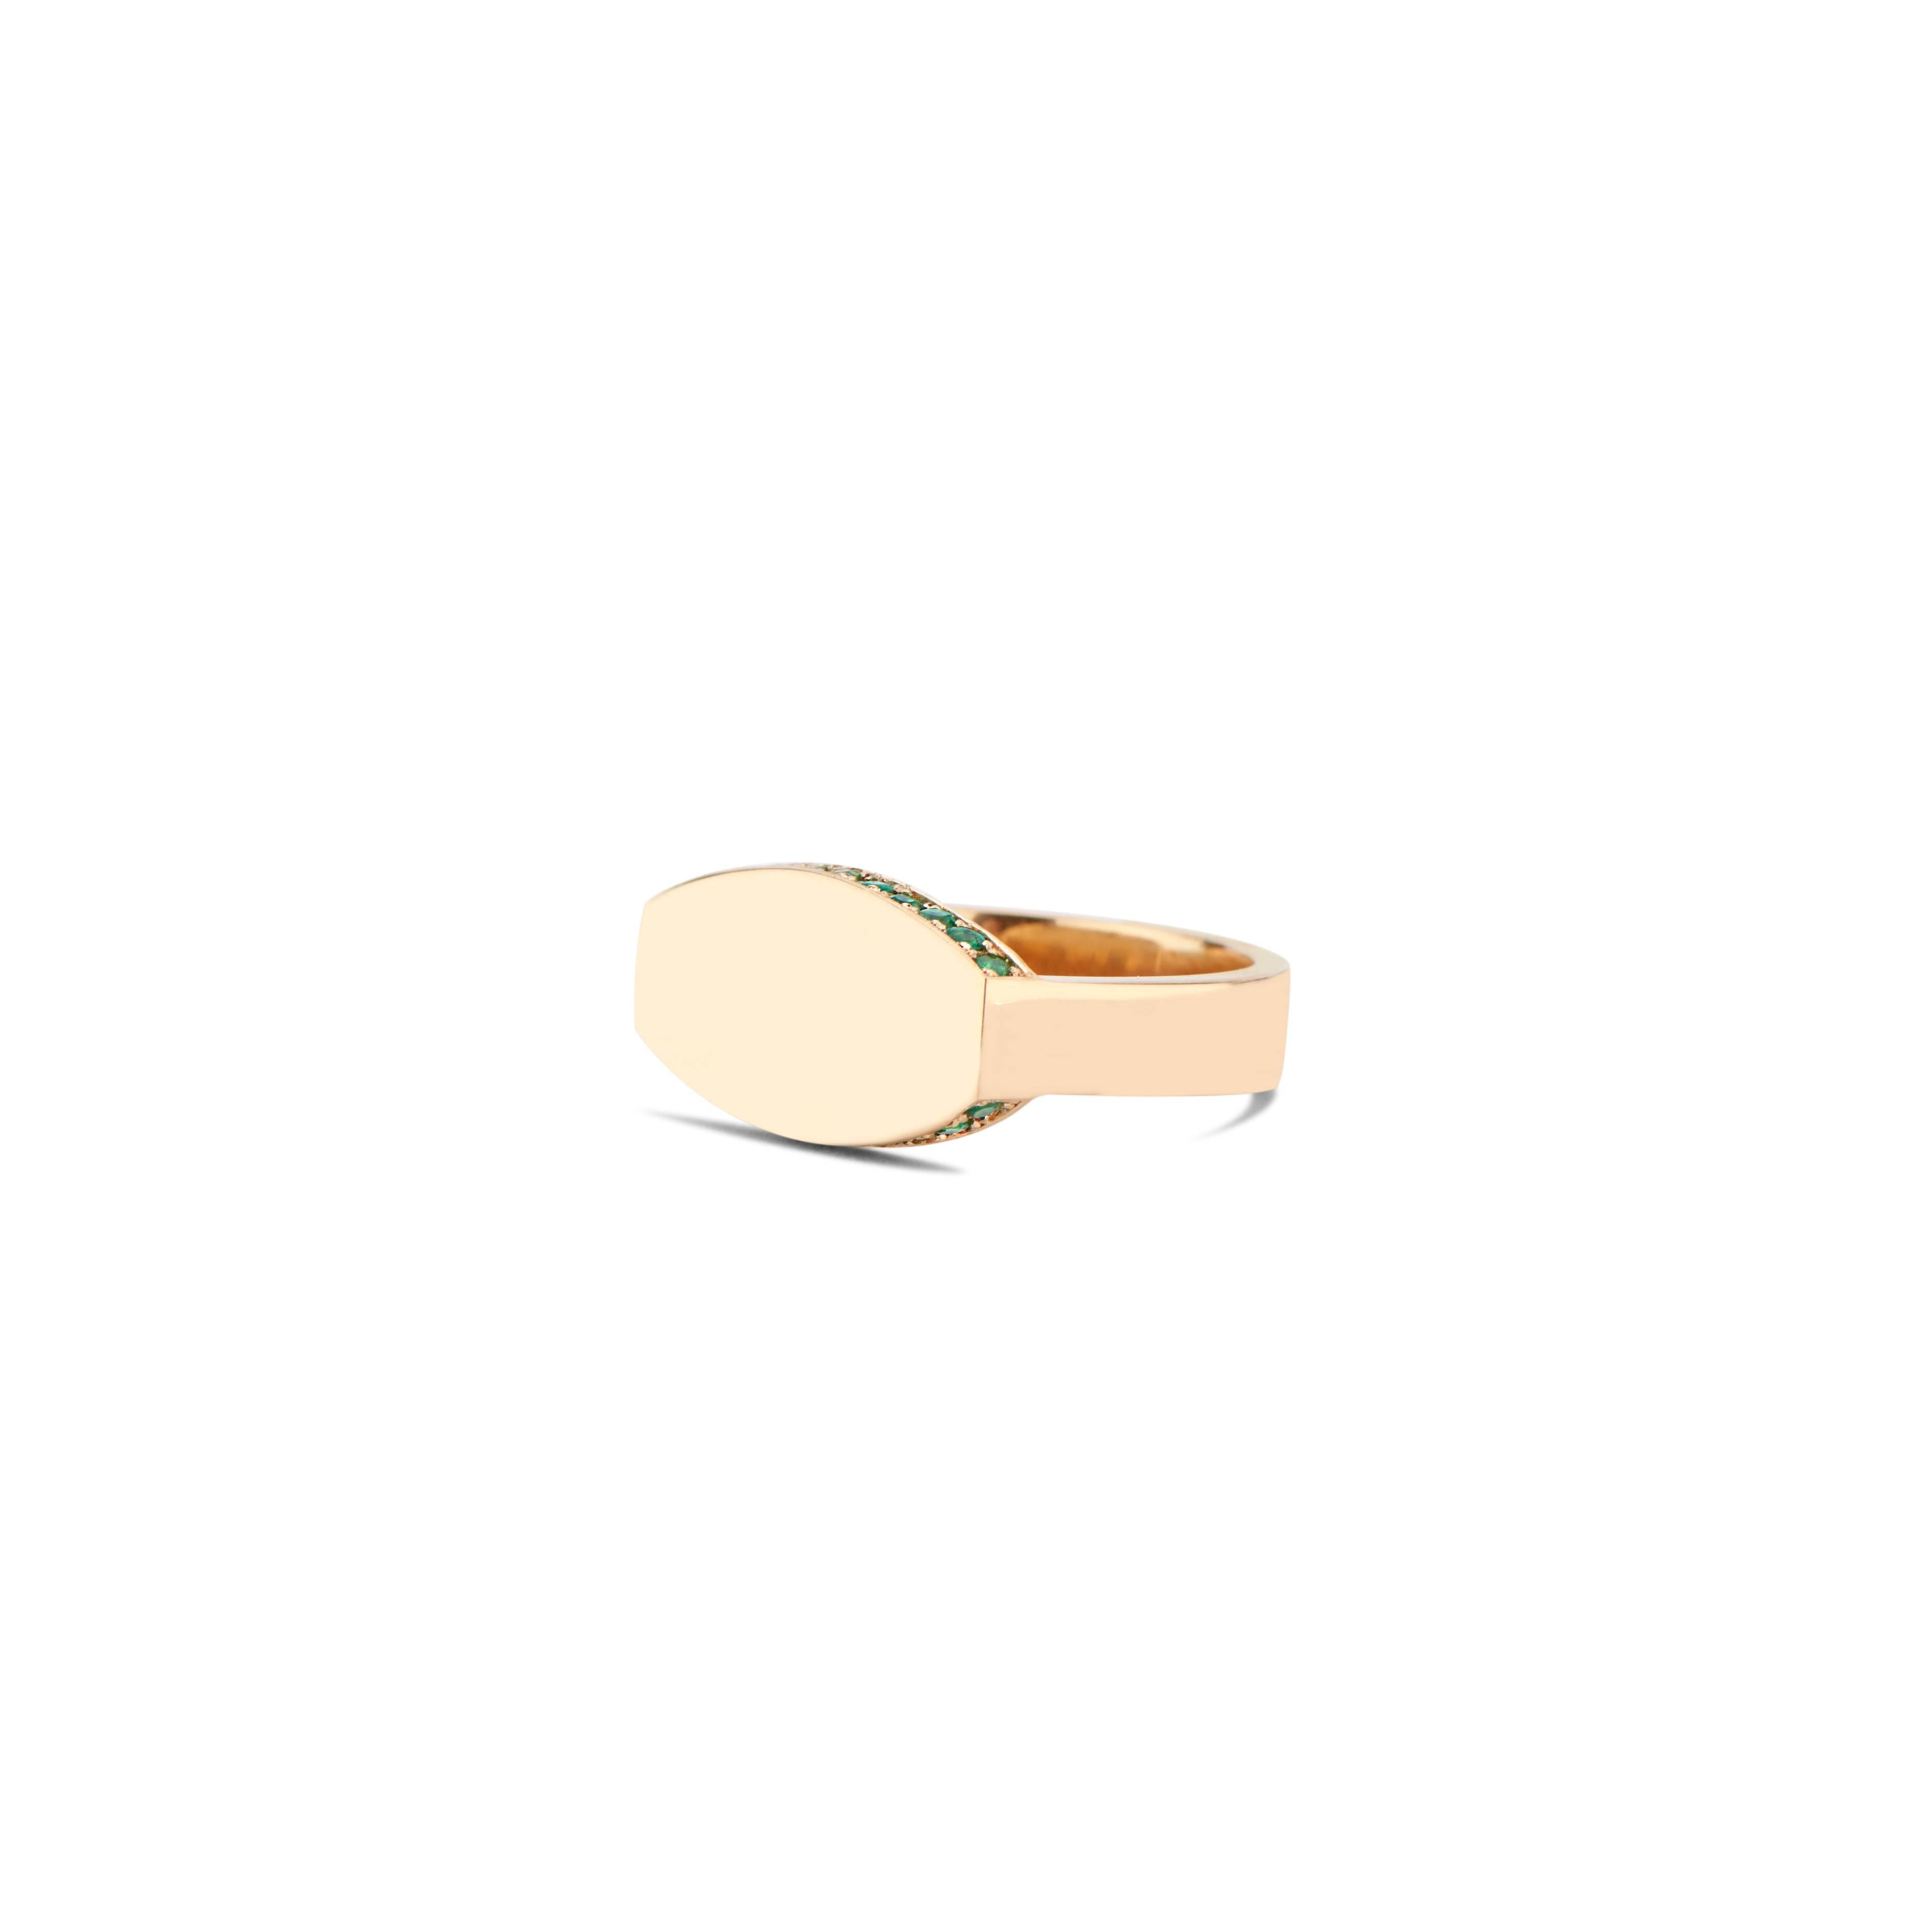 Available to ship immediately, this stunning 18k yellow gold signet marries the modern shape of the 